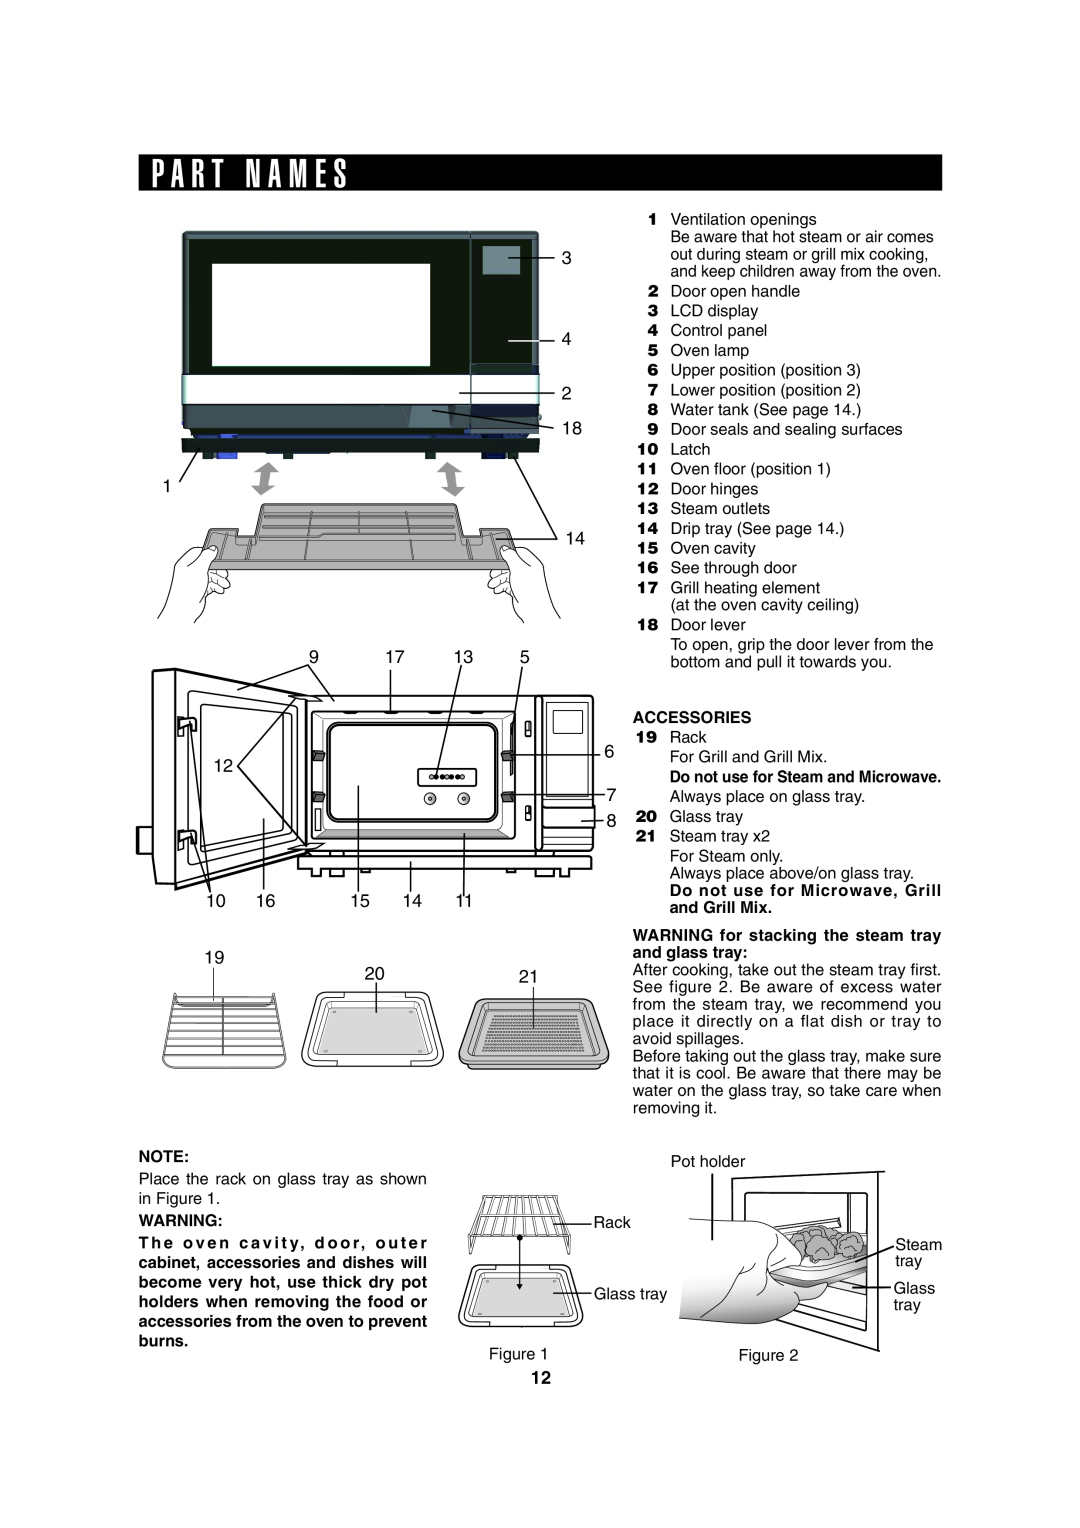 Sharp AX-1100S, AX-1100R operation manual P A R T N A M E S, Accessories, Do not use for Microwave, Grill and Grill Mix 